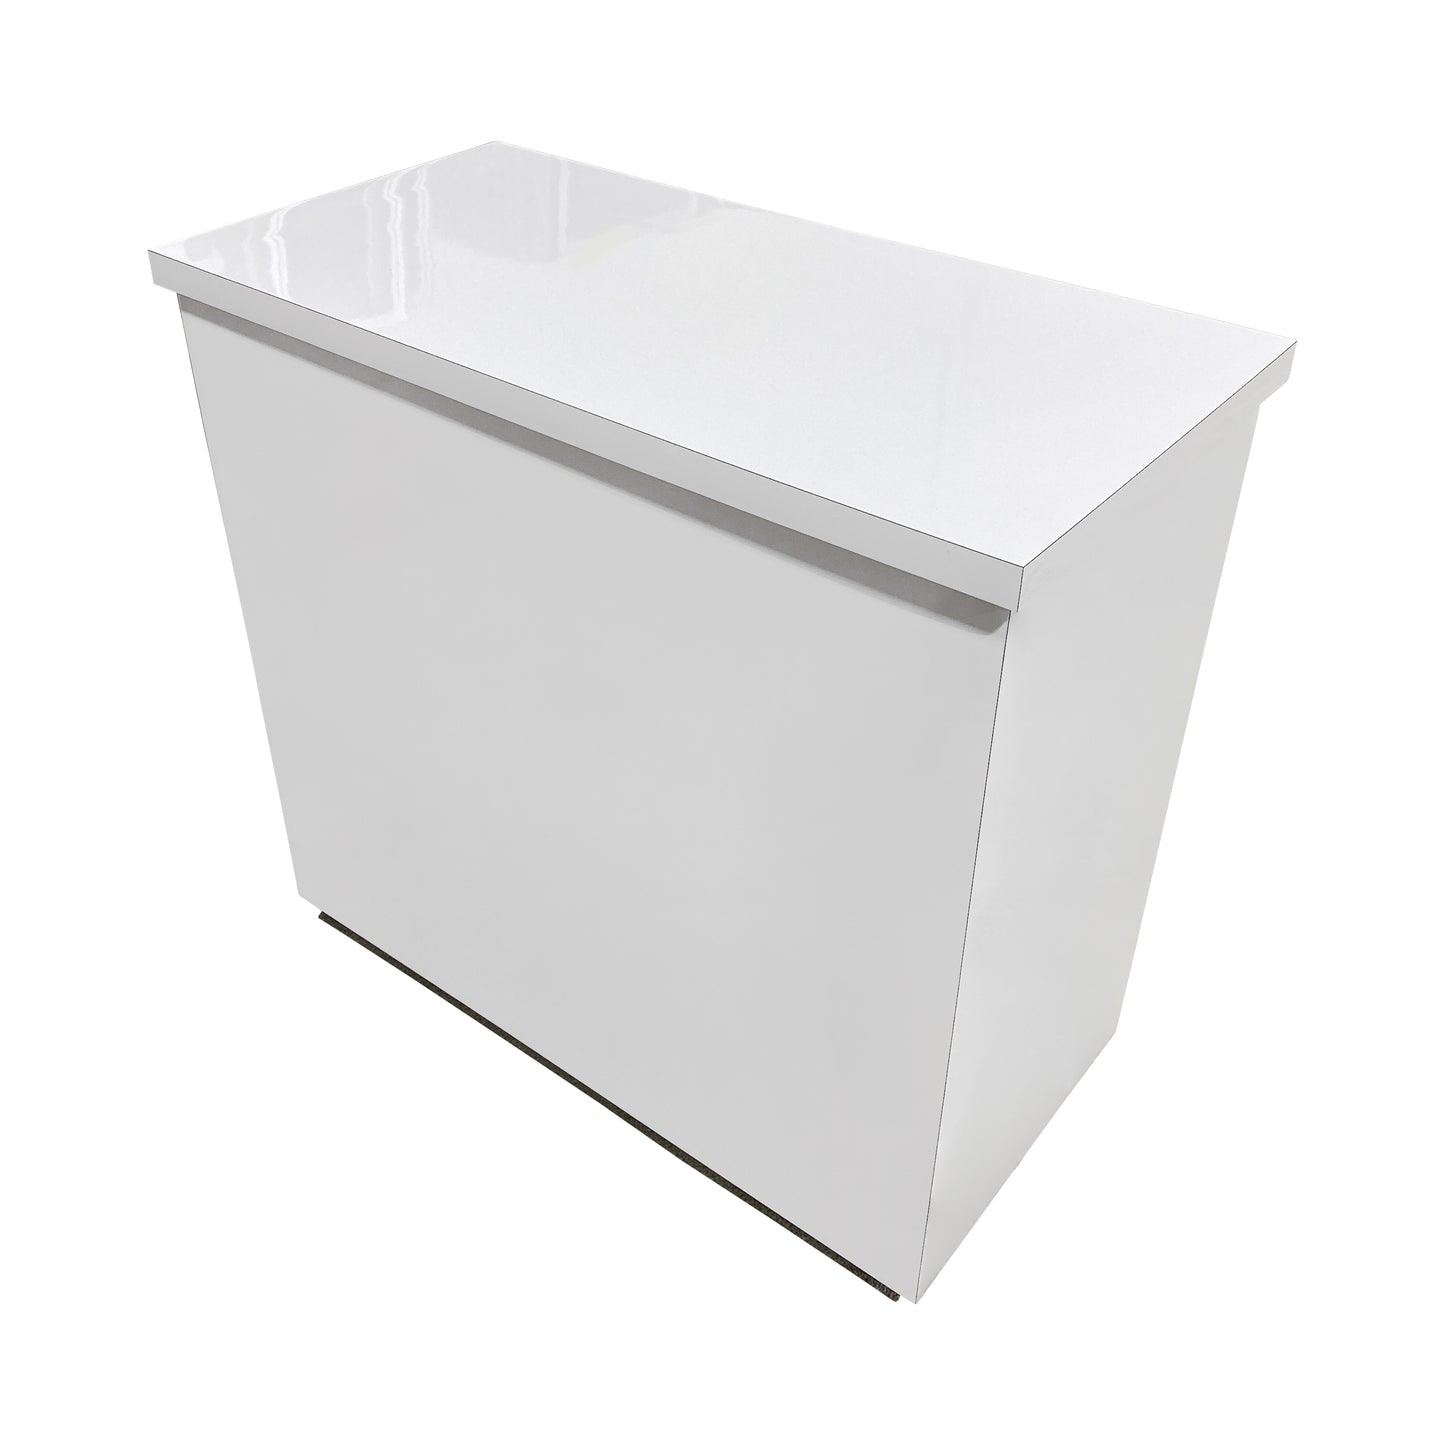 ZBox Cabinet Counter - RENTAL